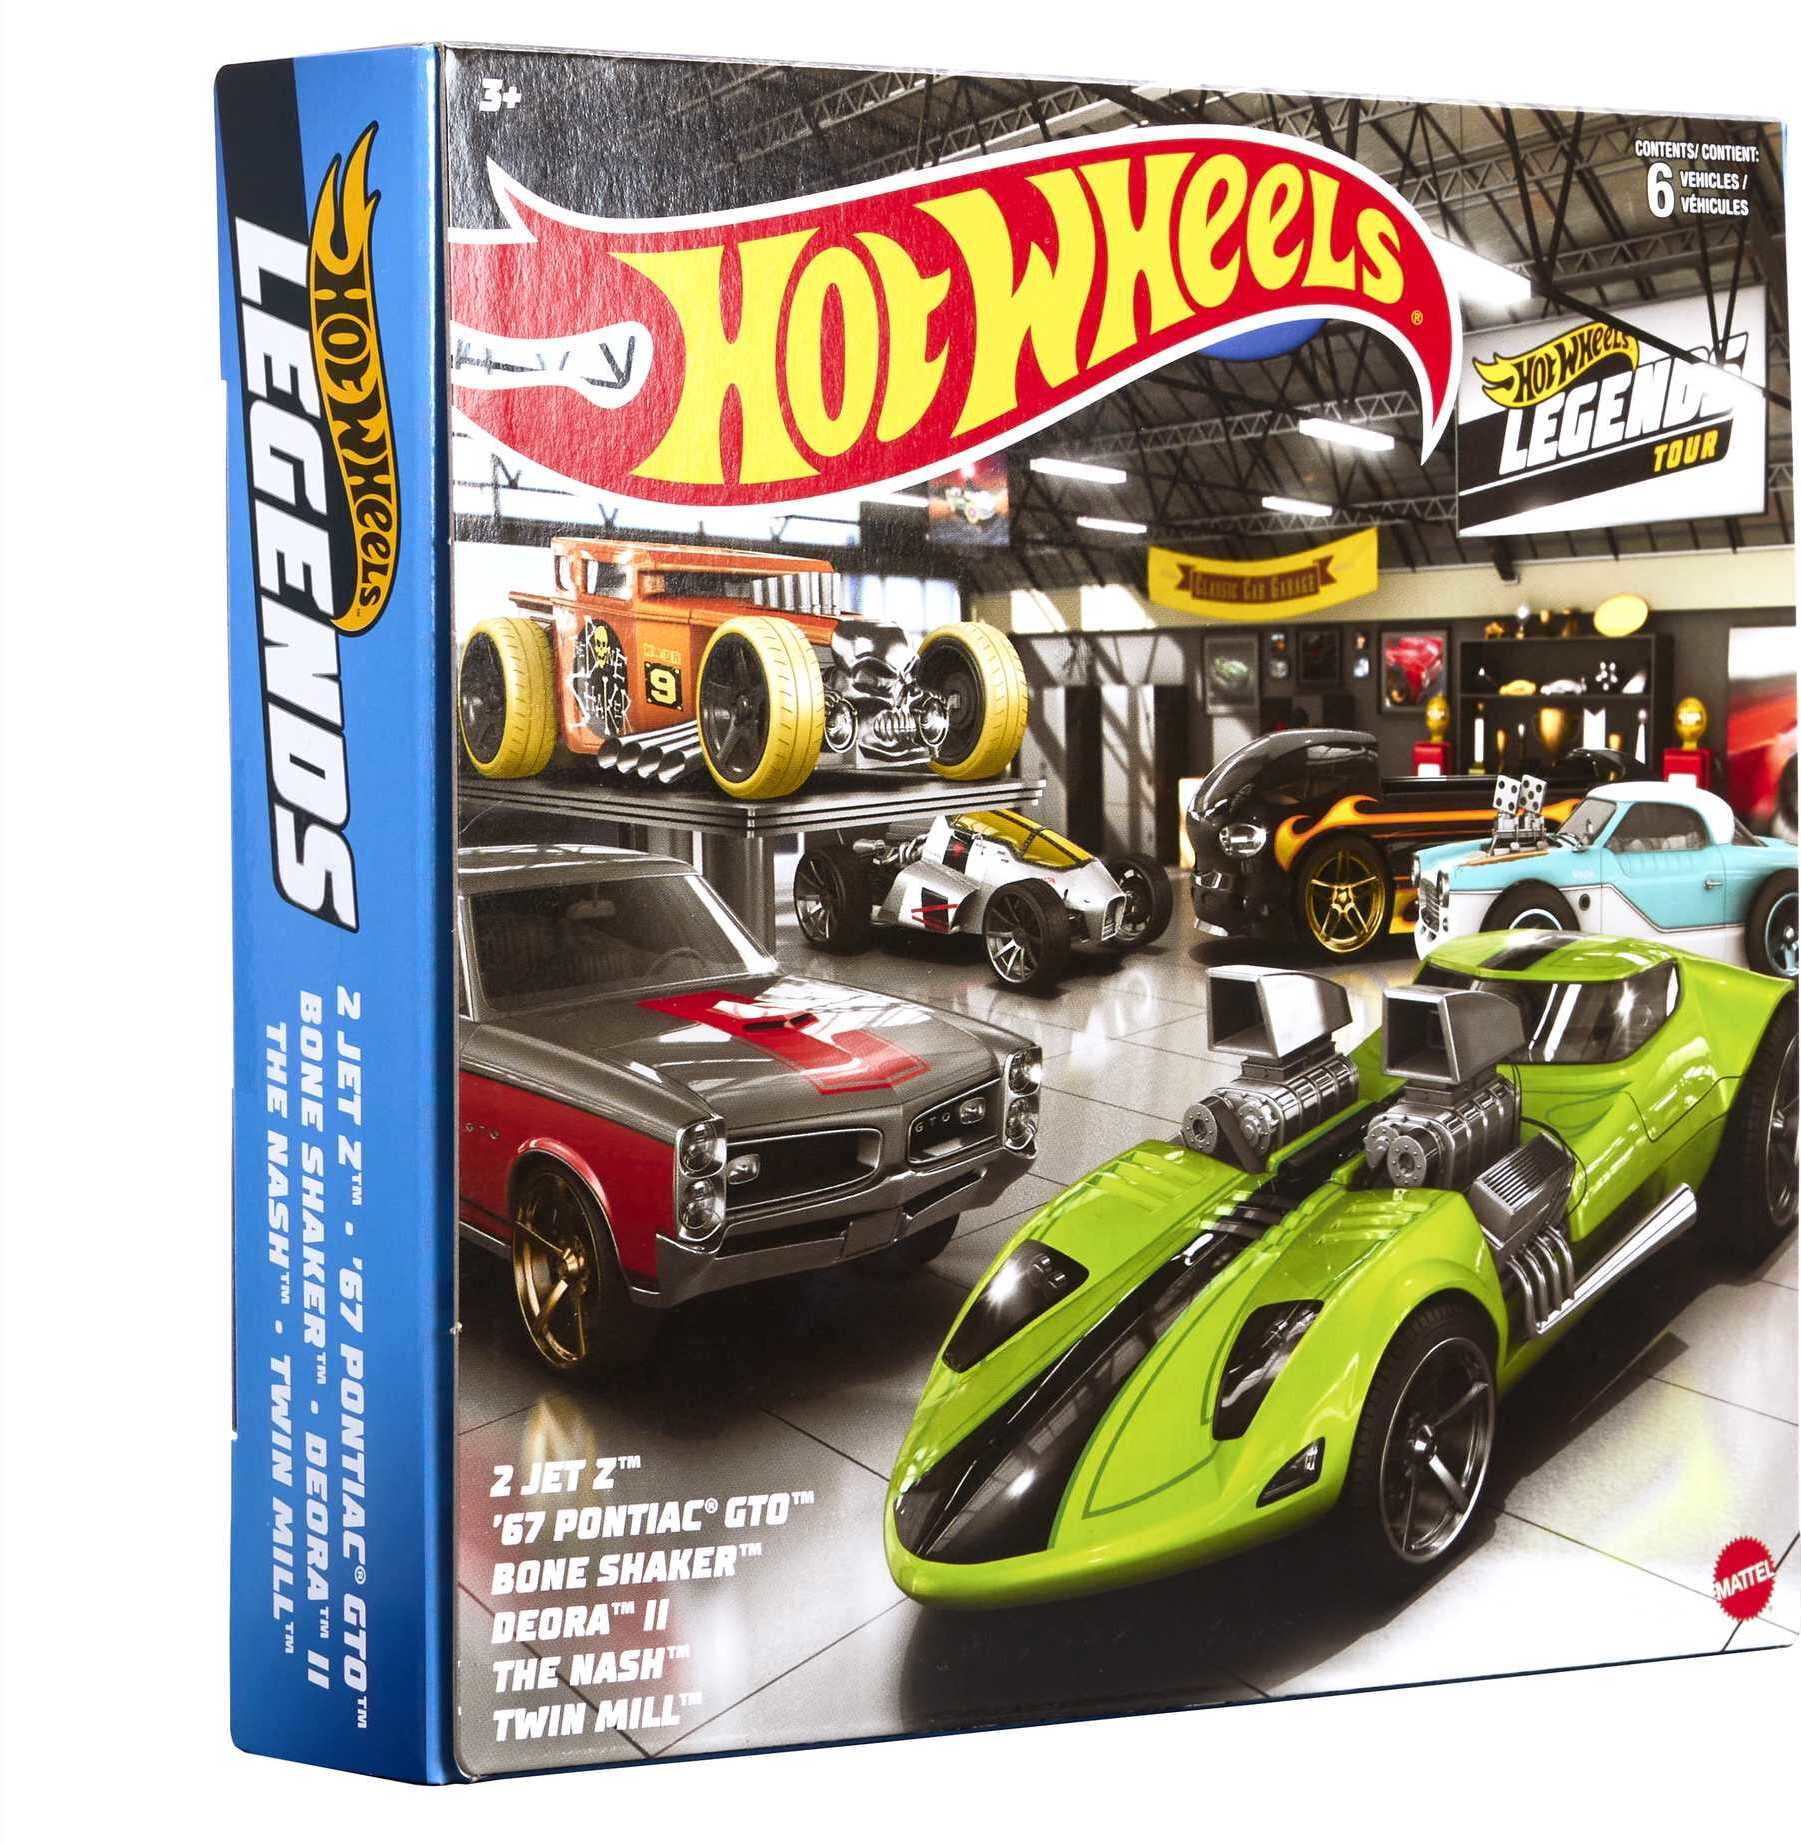 Hot Wheels Various Models 1:64 Scale Diecast Toy Car New Open CHOOSE YOUR MODELS 